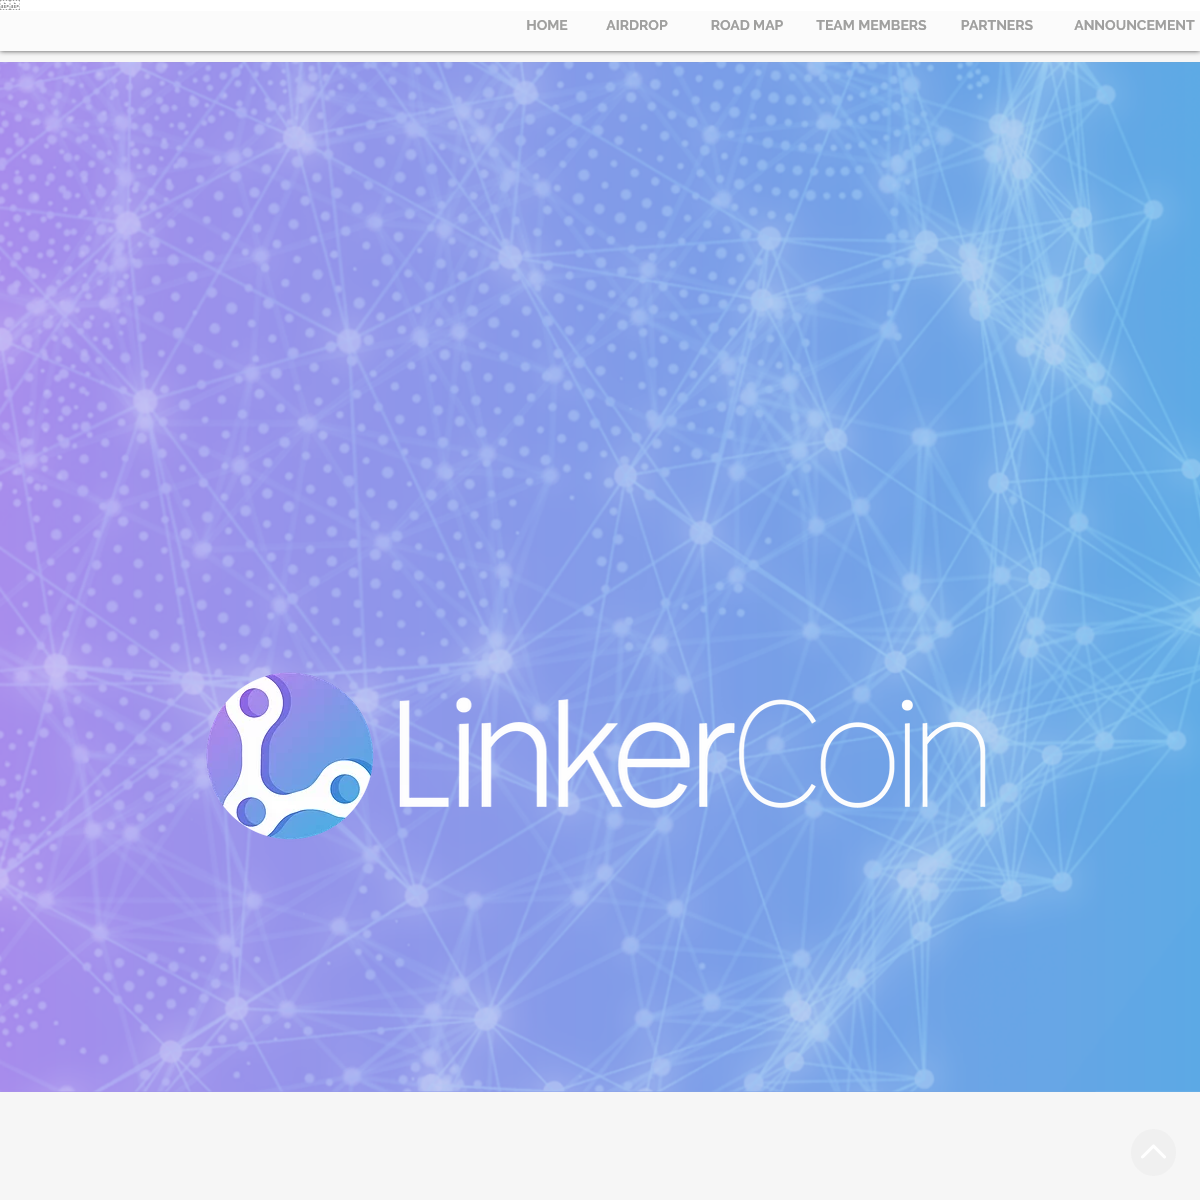 A complete backup of linkercoin.com